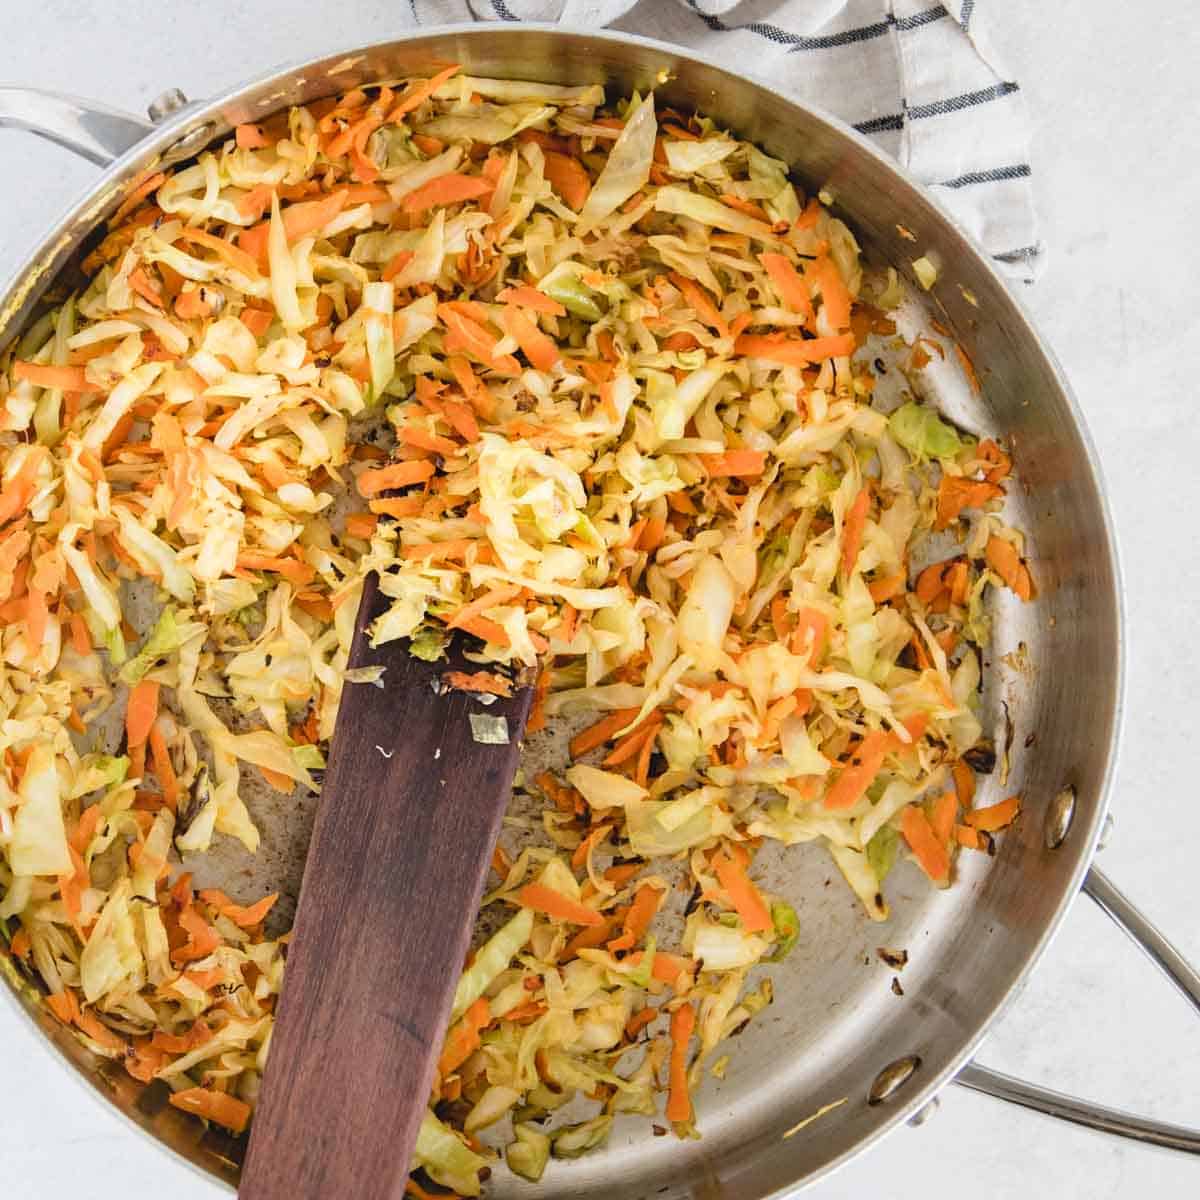 sauteed shredded cabbage and carrots in a large skillet